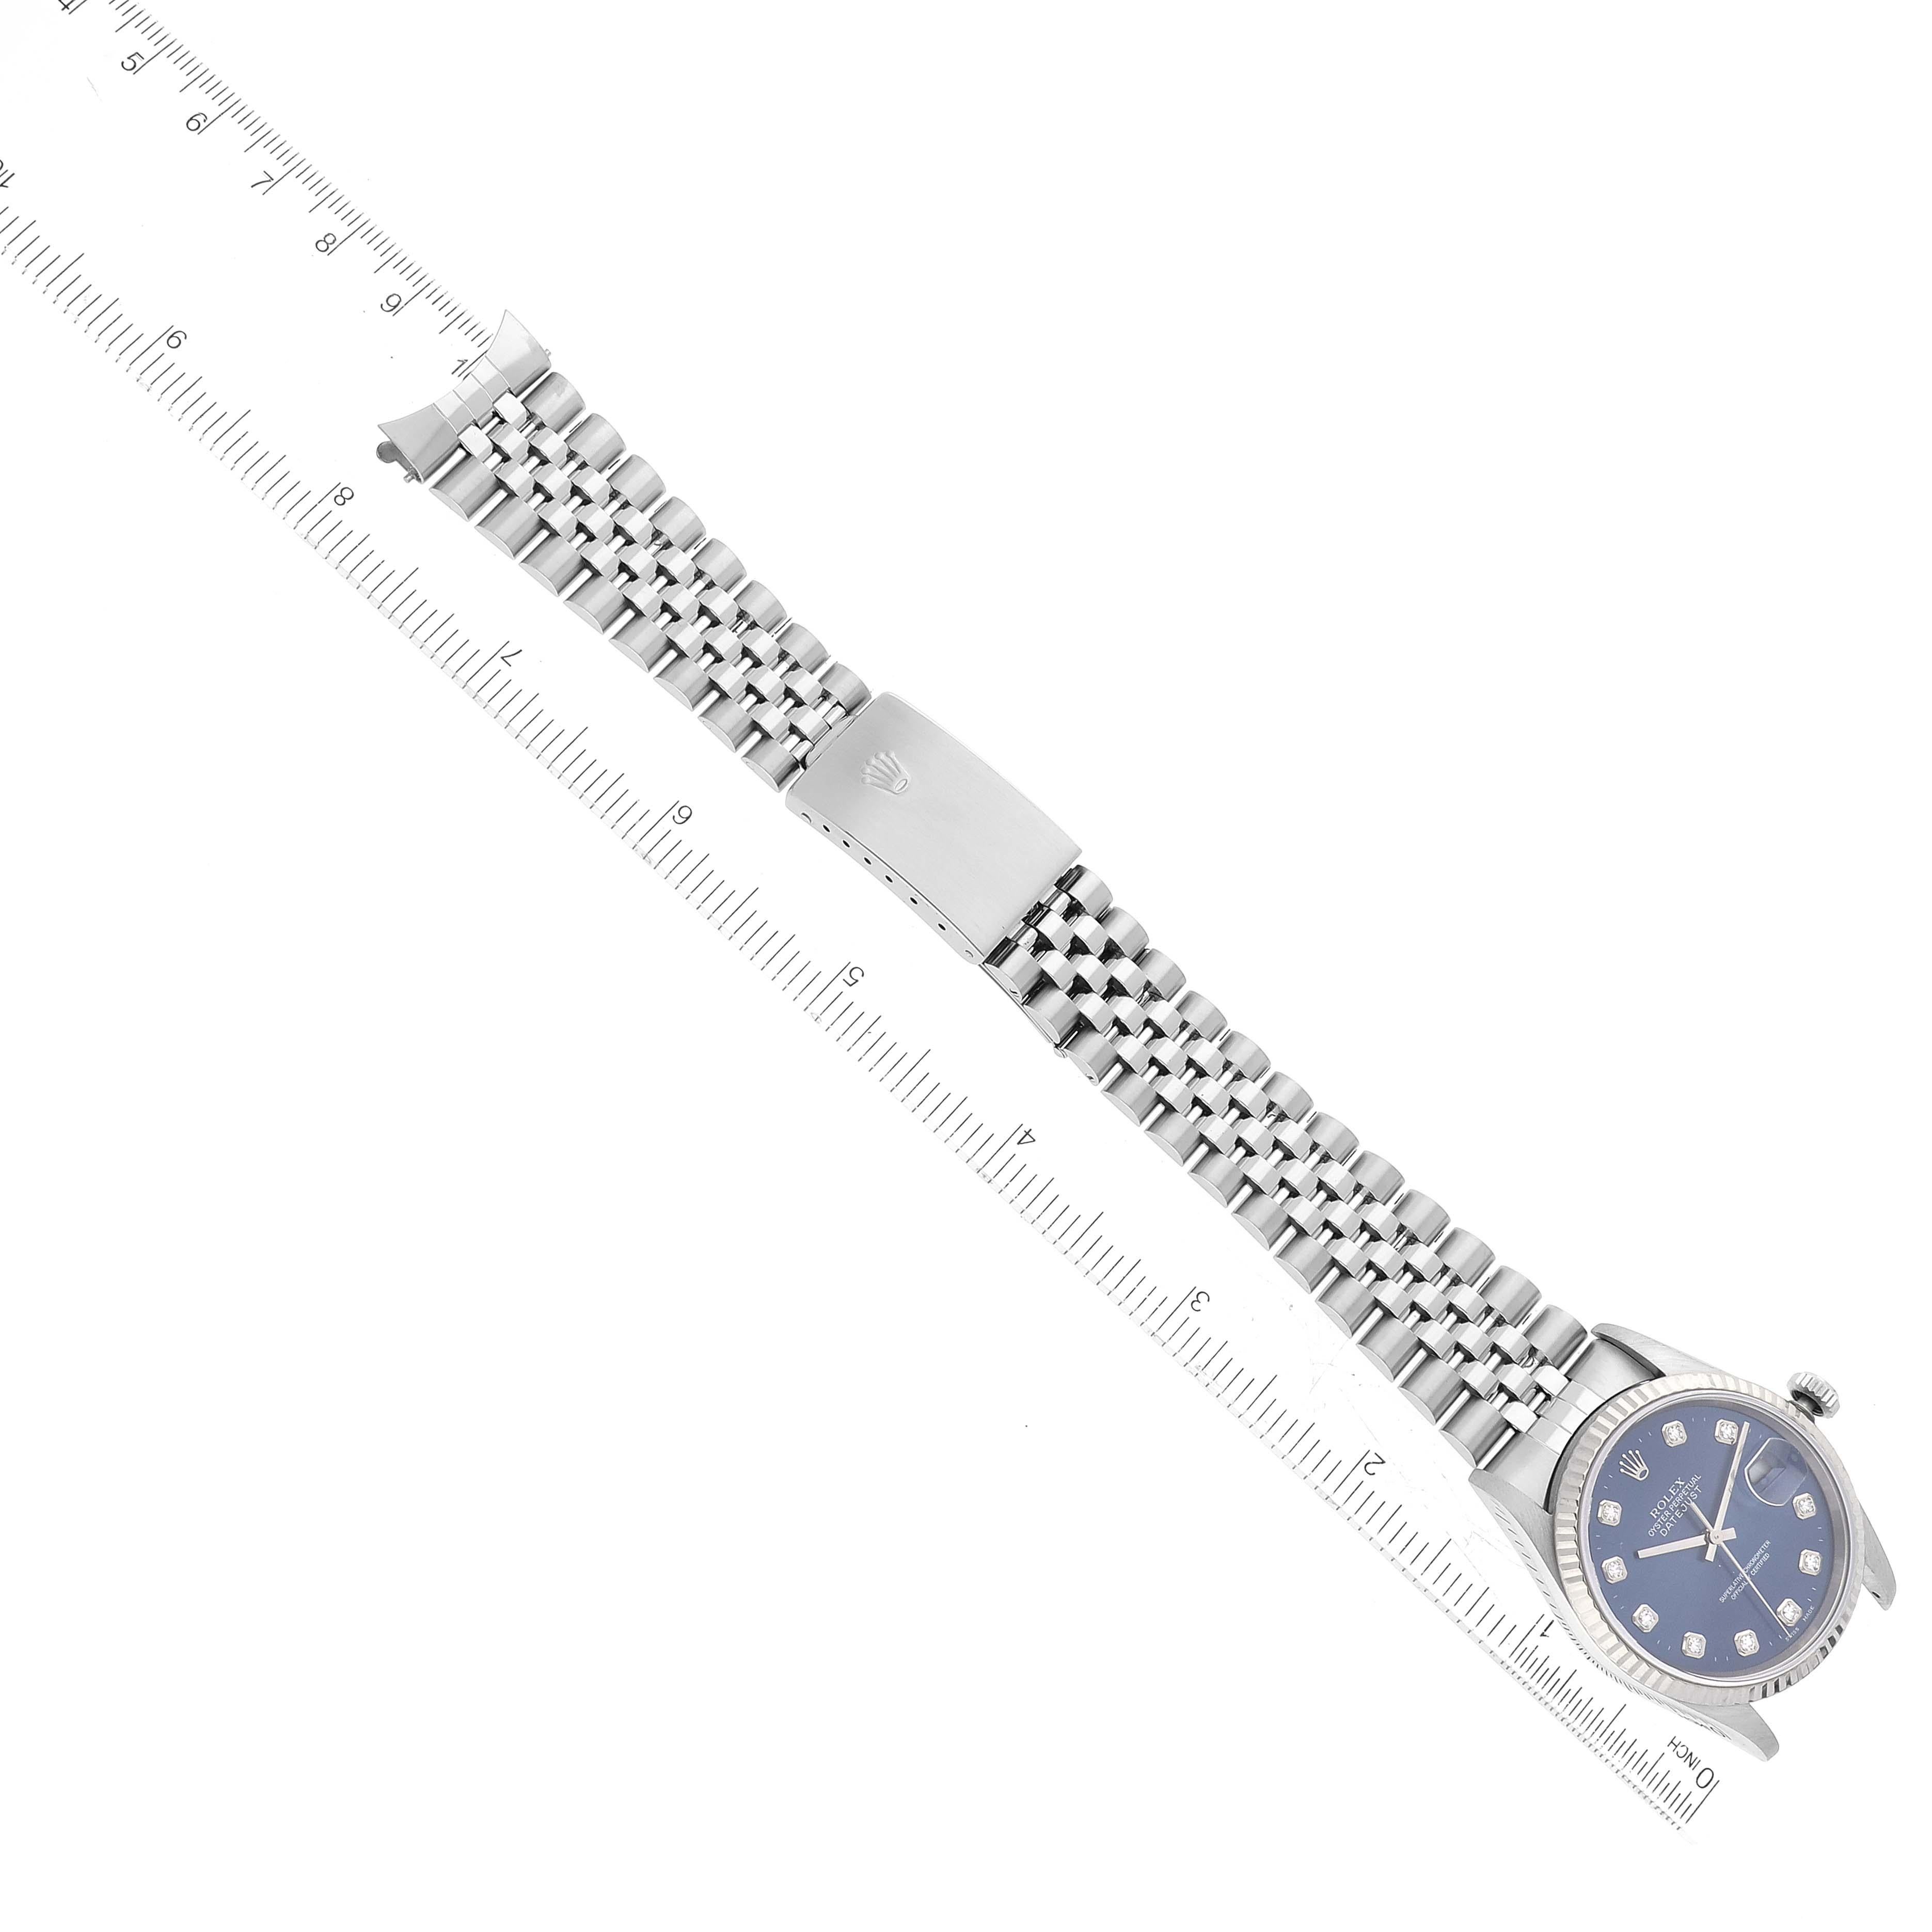 Rolex Datejust Steel White Gold Blue Diamond Dial Mens Watch 16234 Box Papers 4